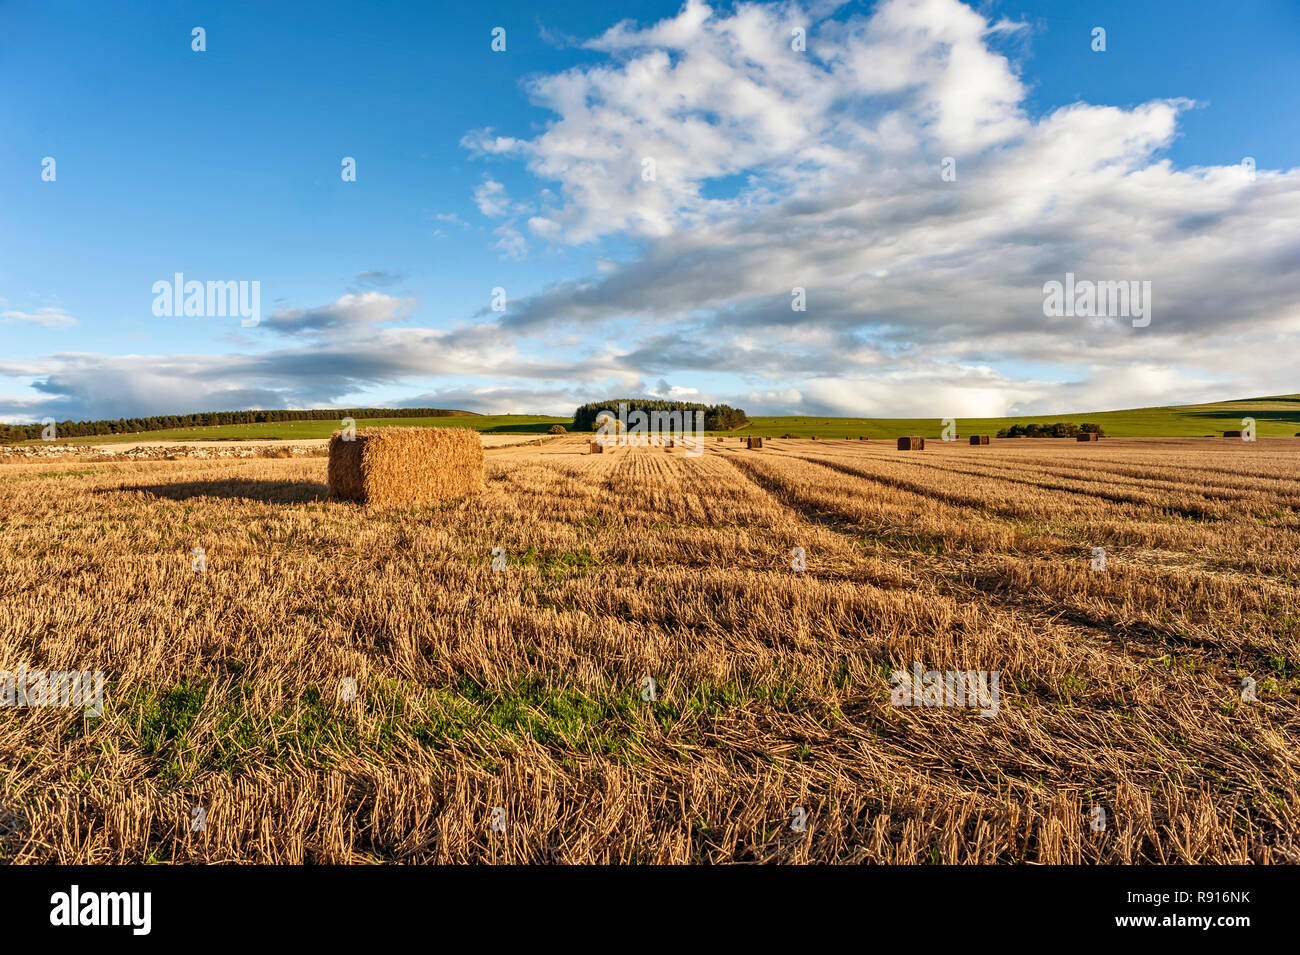 Rectangular straw bale in harvested field against a bright blue cloudy sky with distant background  trees Stock Photo